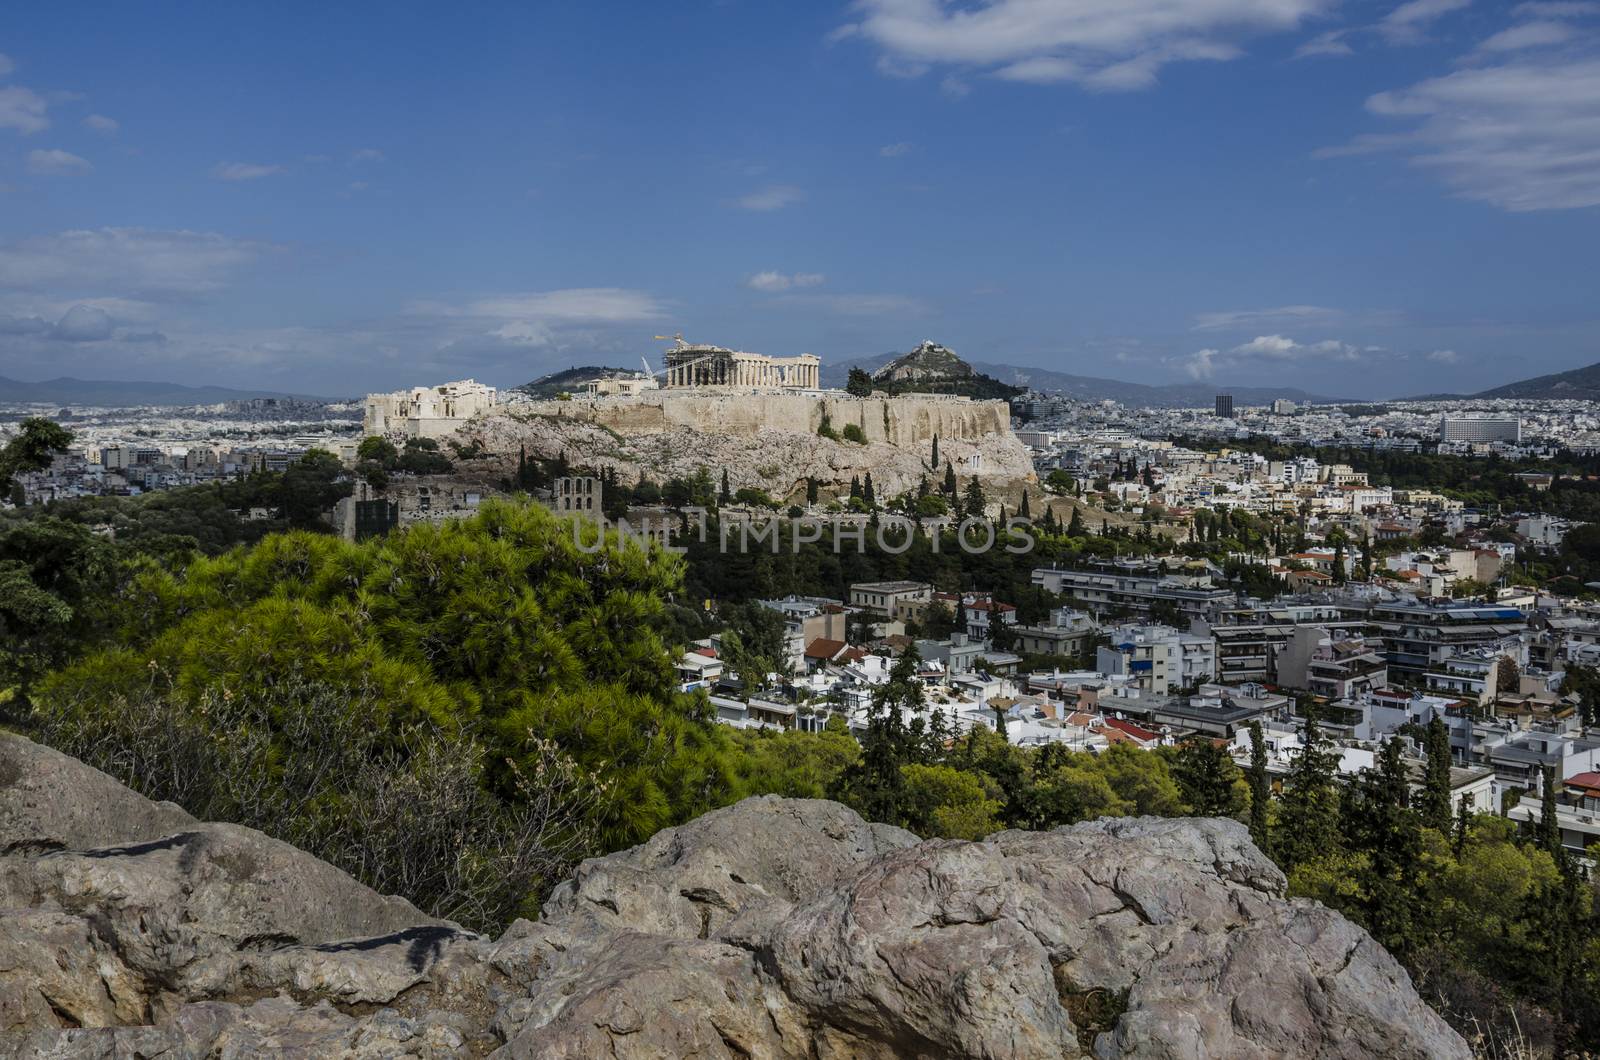 view from the philopappos hill of the acropolis and in the background the hill lycabettus